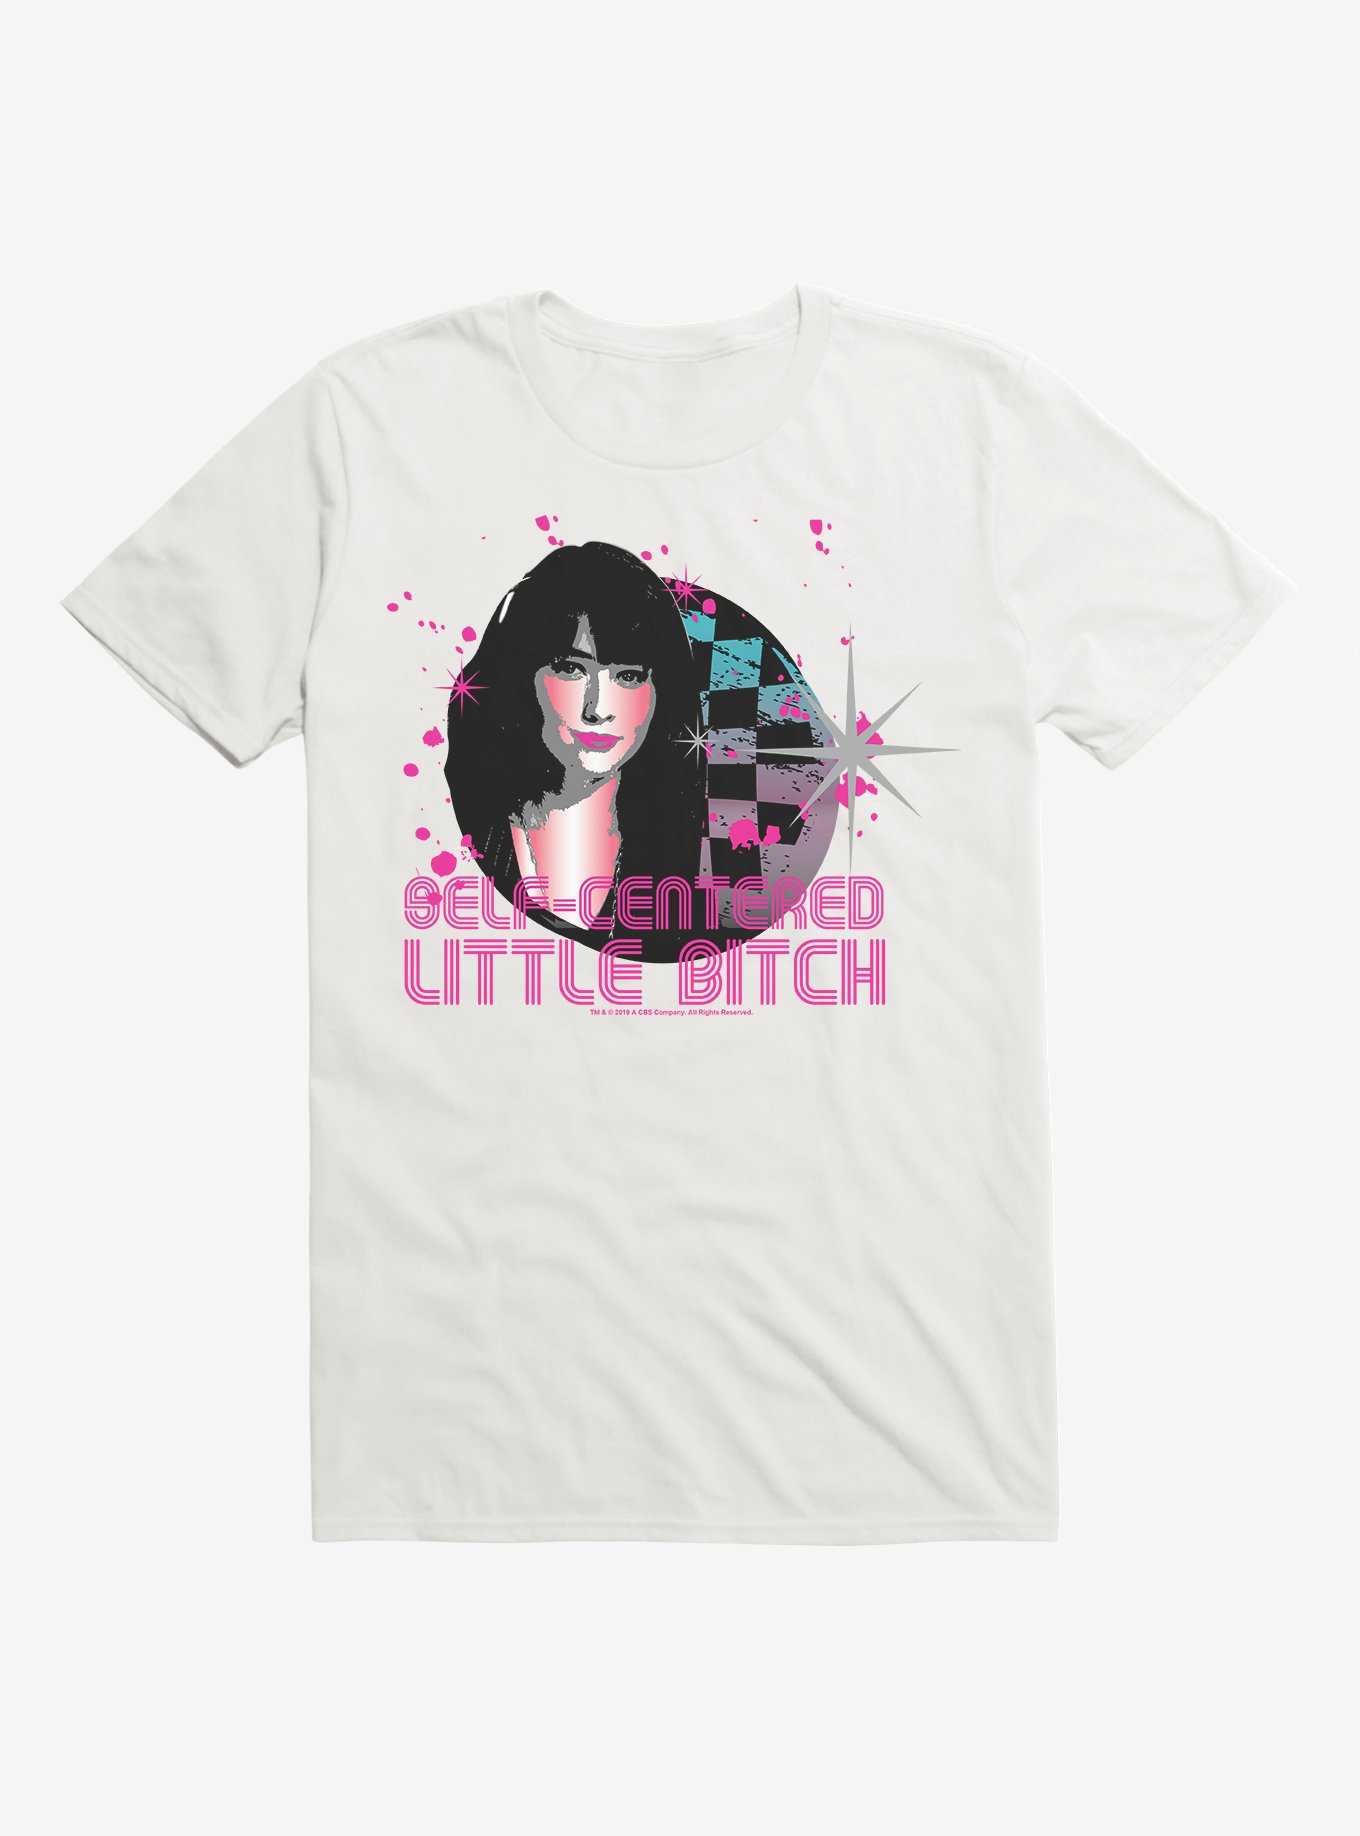 OFFICIAL 90210 T-Shirts & Merch | Hot Topic | T-Shirts